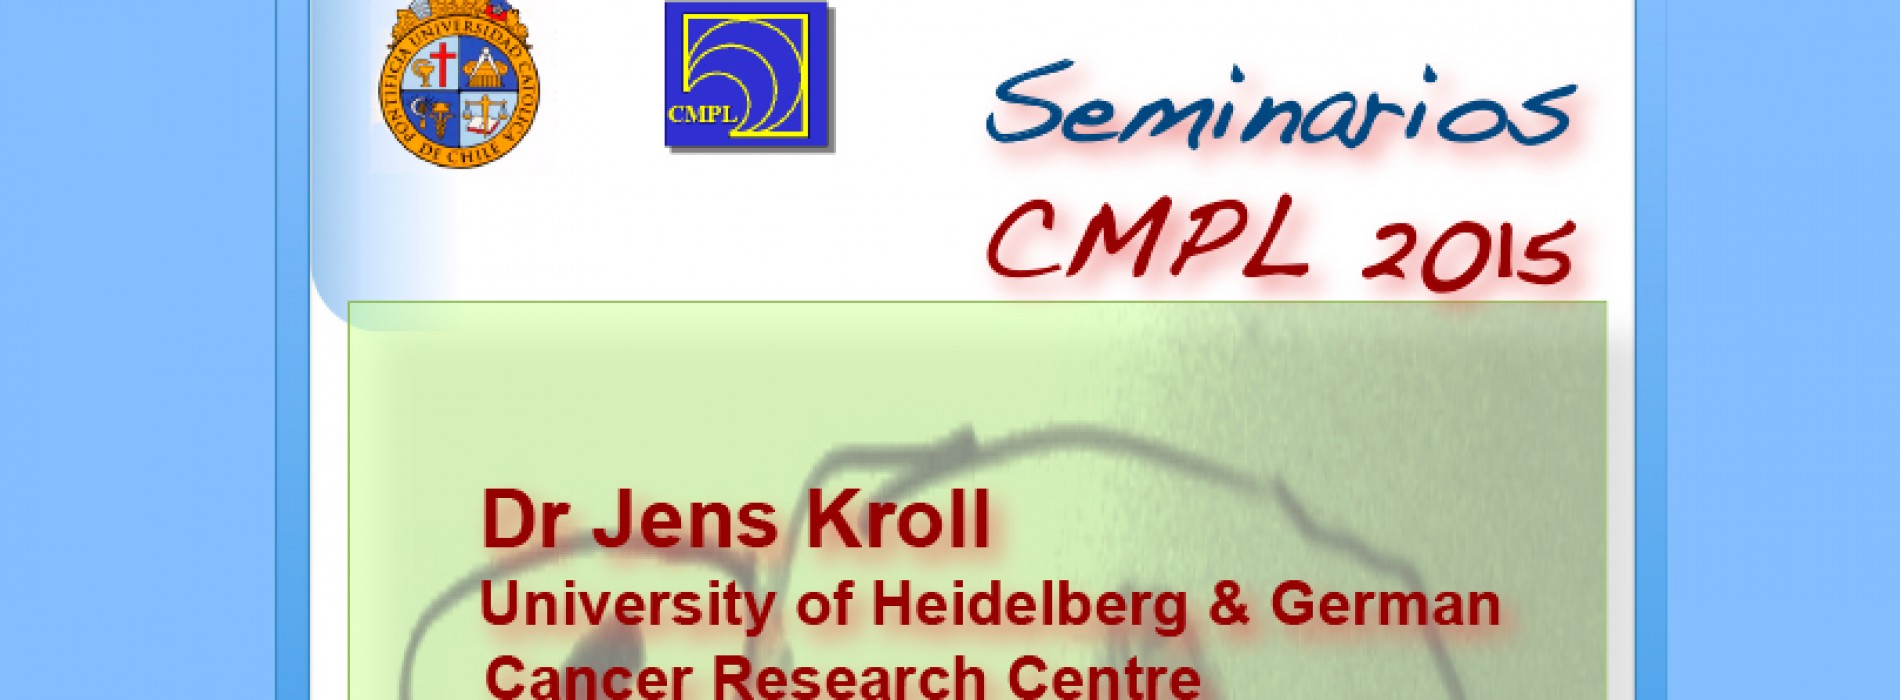 Invitation to 2 seminars Dr. Jens Kroll, University of Heidelberg and from the German Cancer Research Center Heidelberg (DKFZ), Germany